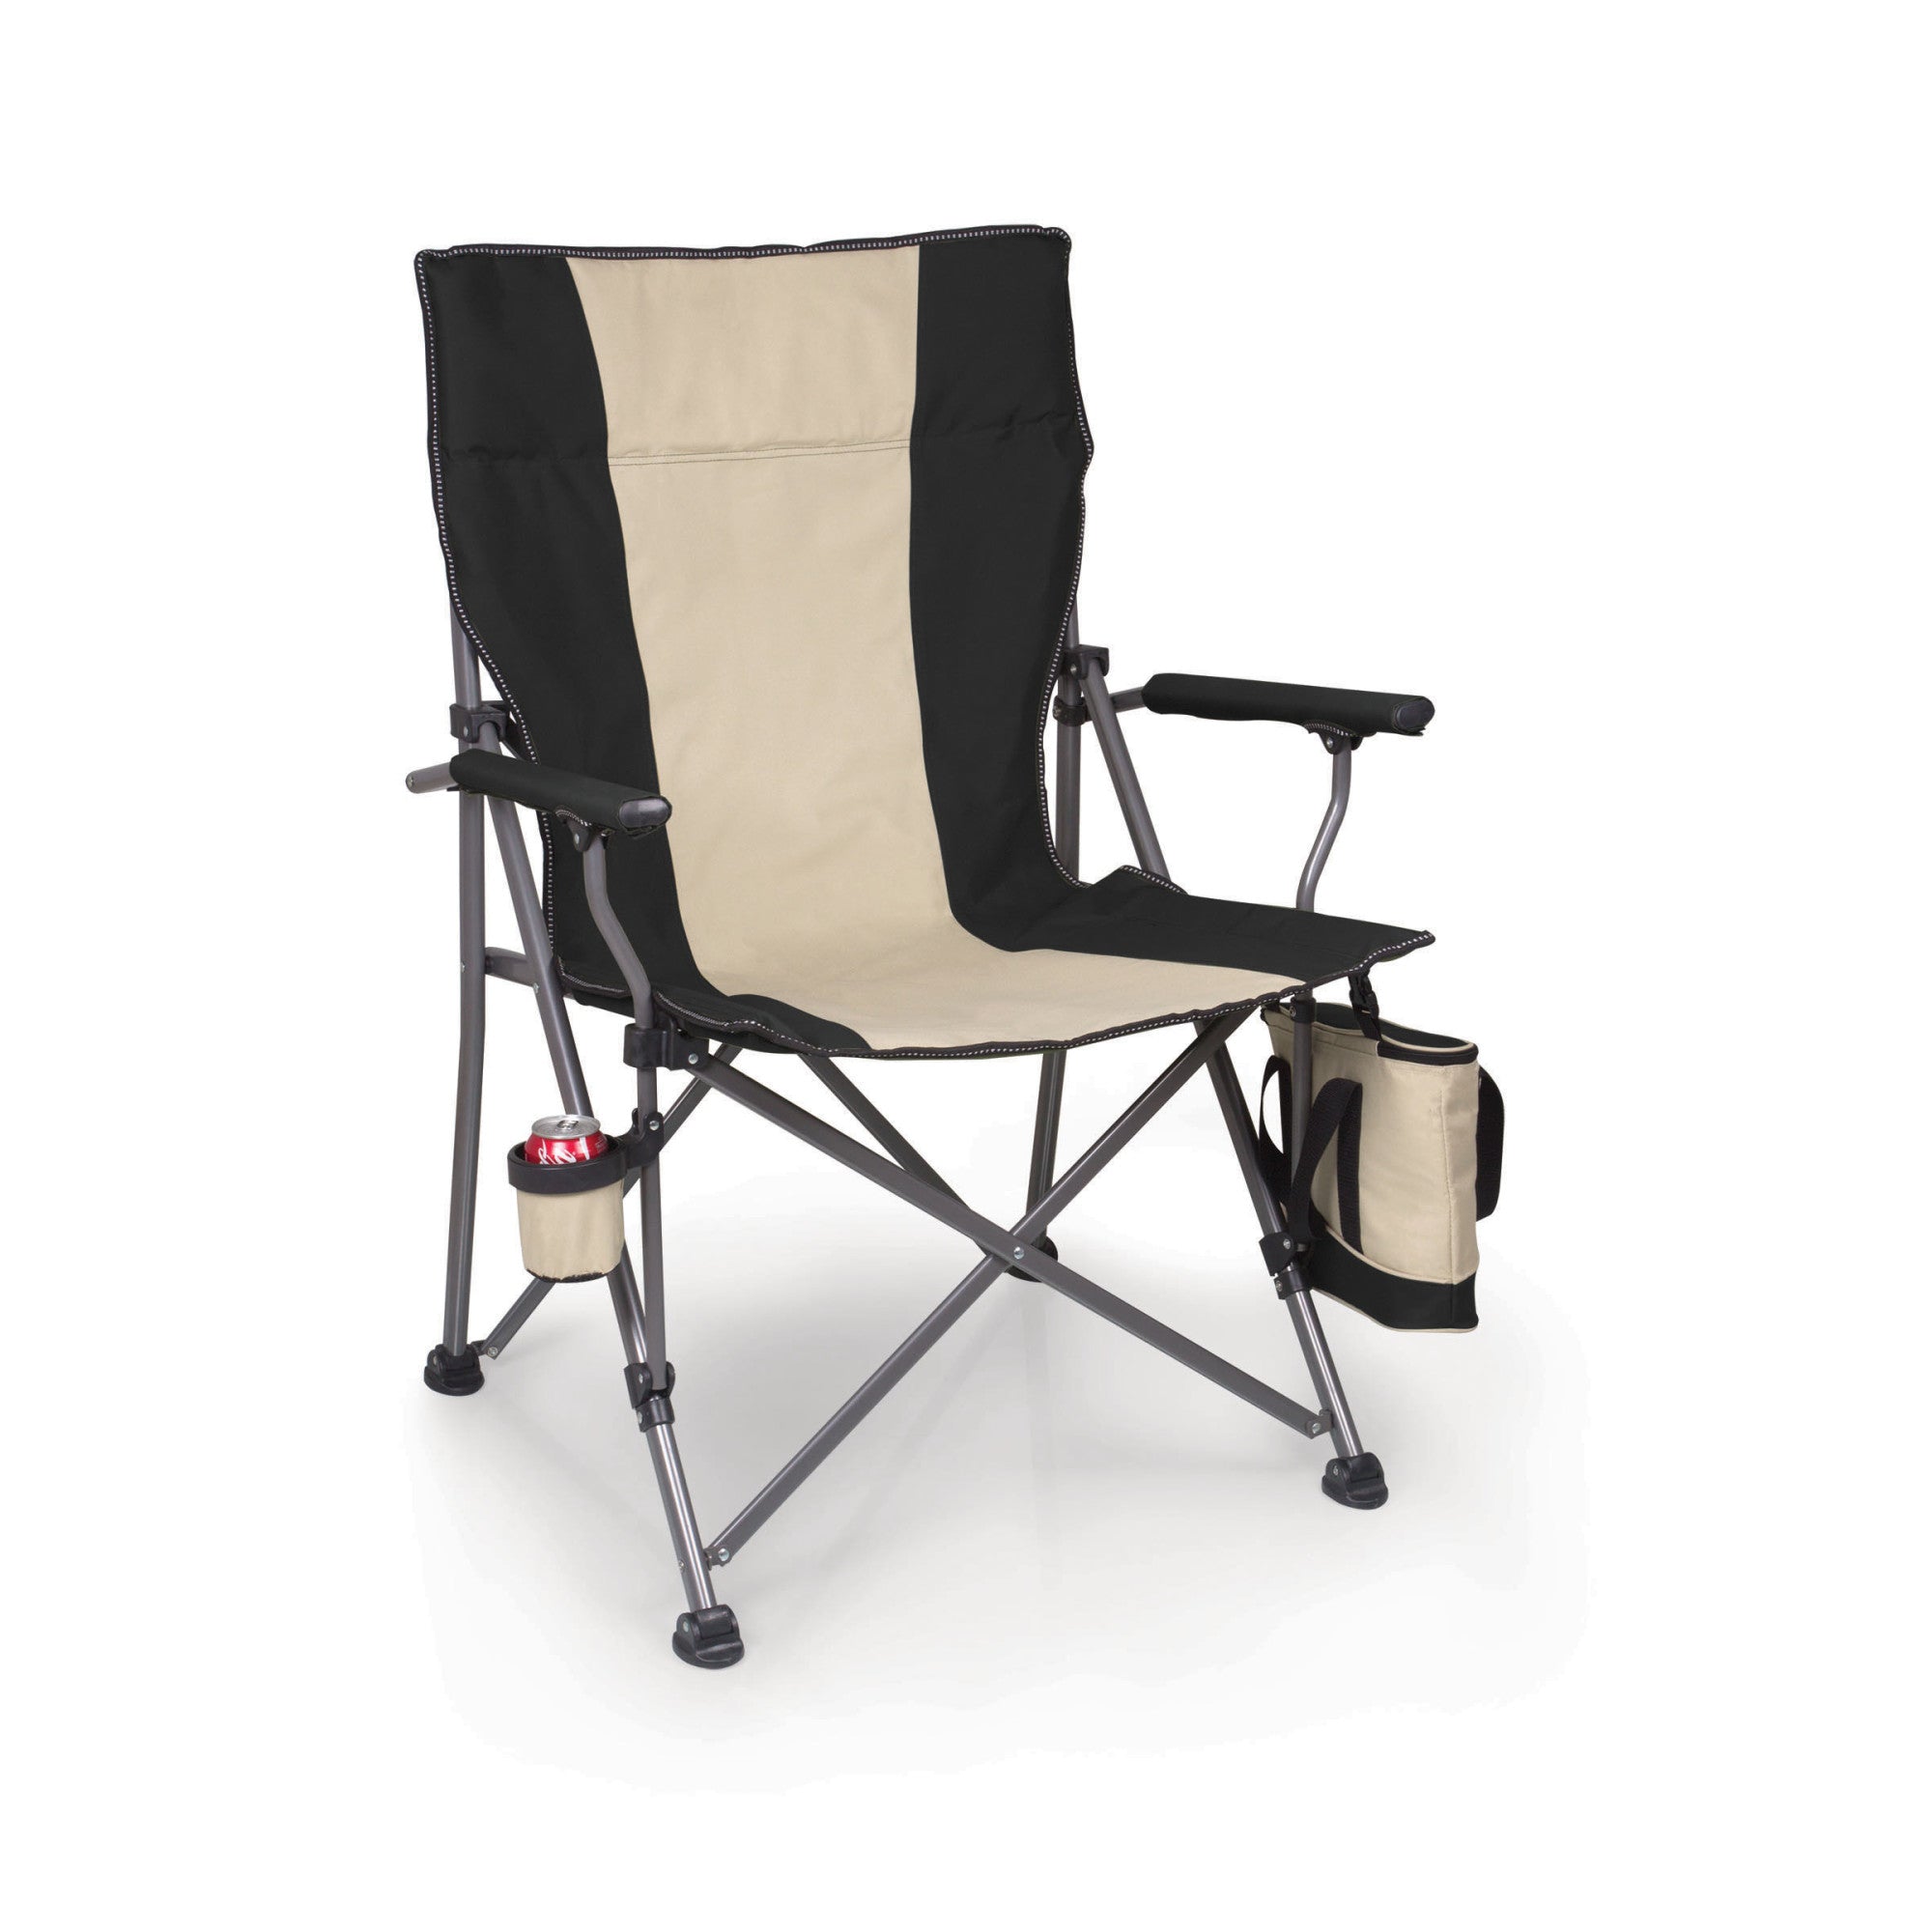 Tampa Bay Buccaneers - Big Bear XXL Camping Chair with Cooler